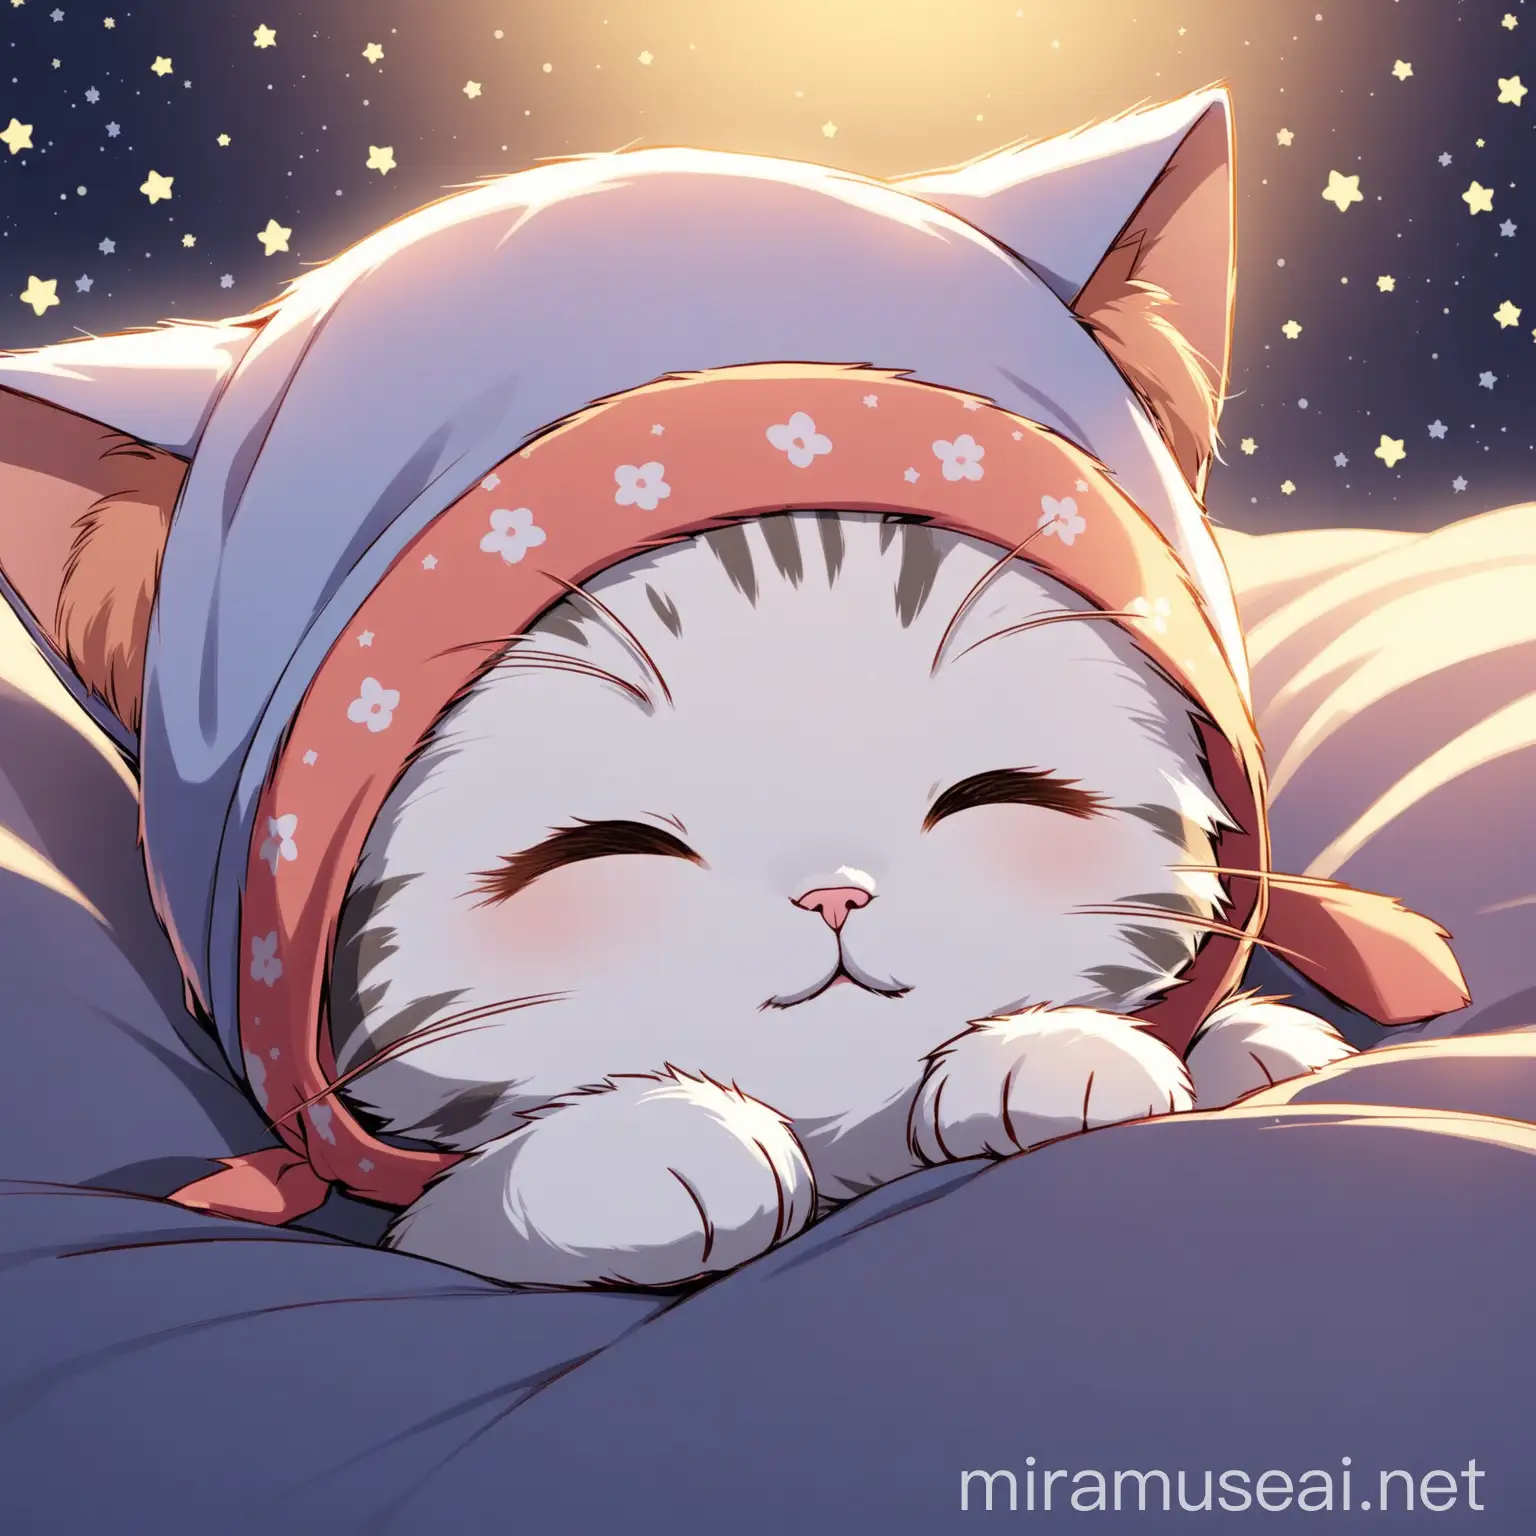 The beautiful kitty goes to sleep at night in a sleeping cap